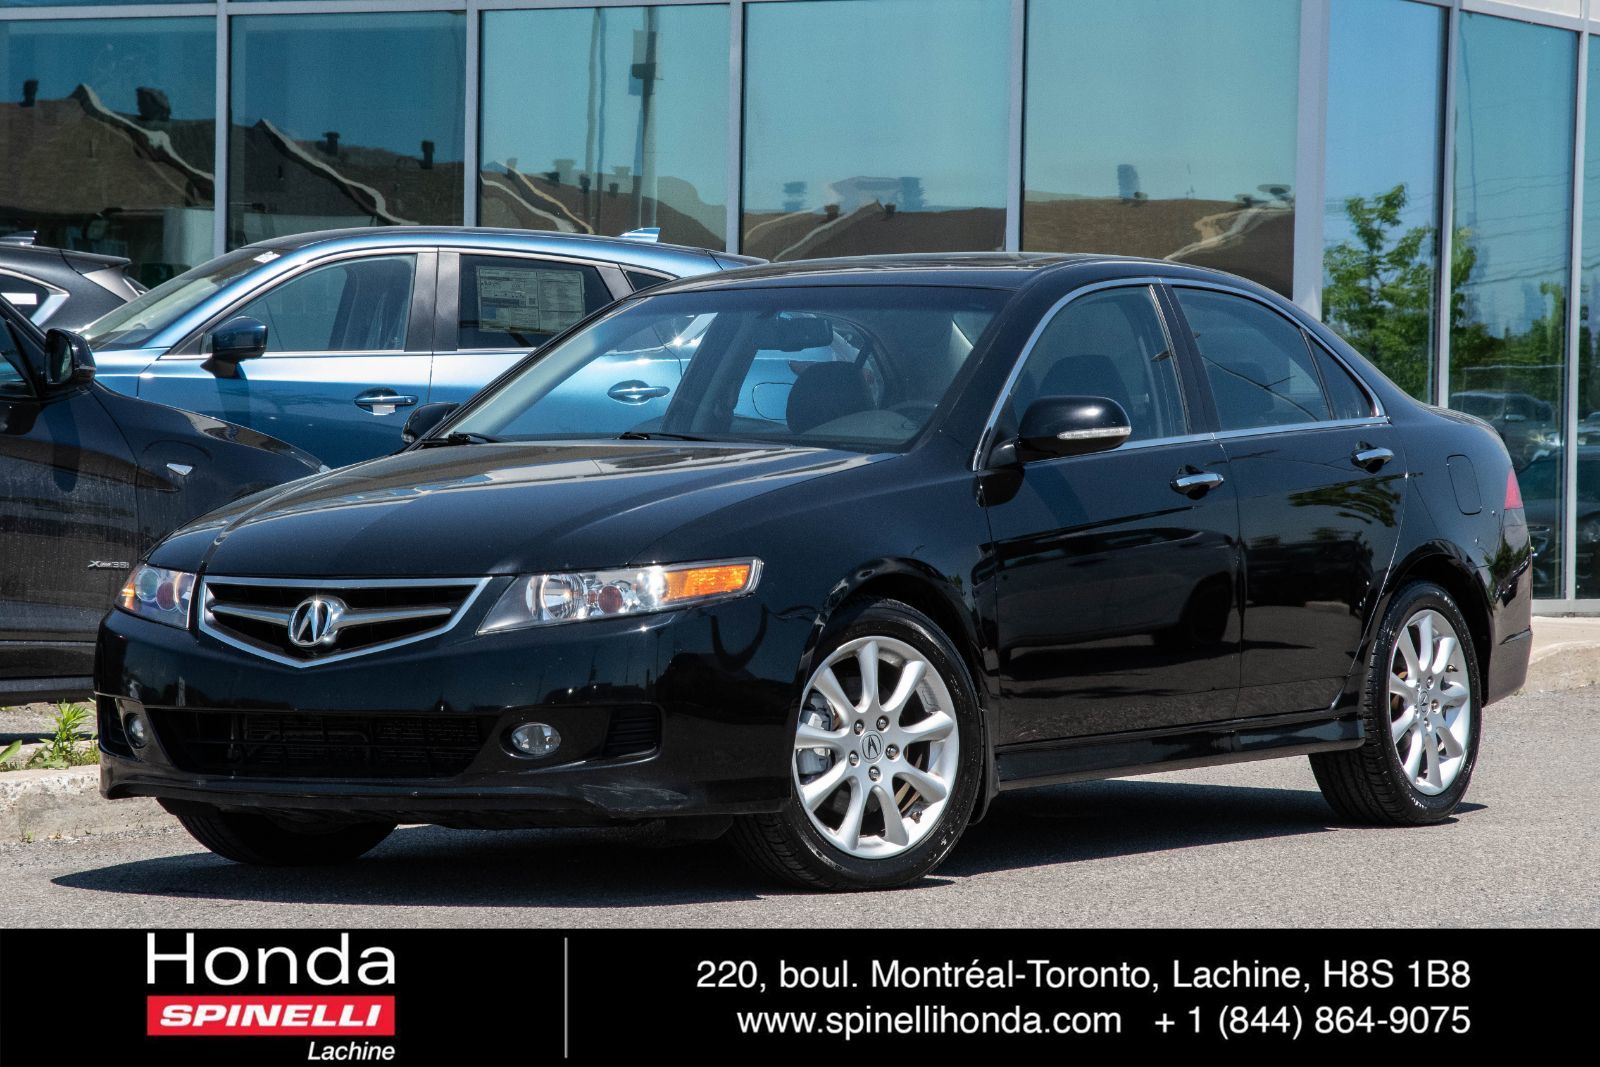 Used 08 Acura Tsx Deal Pending Premium Navigation For Sale In Montreal Ha Spinelli Honda Lachine